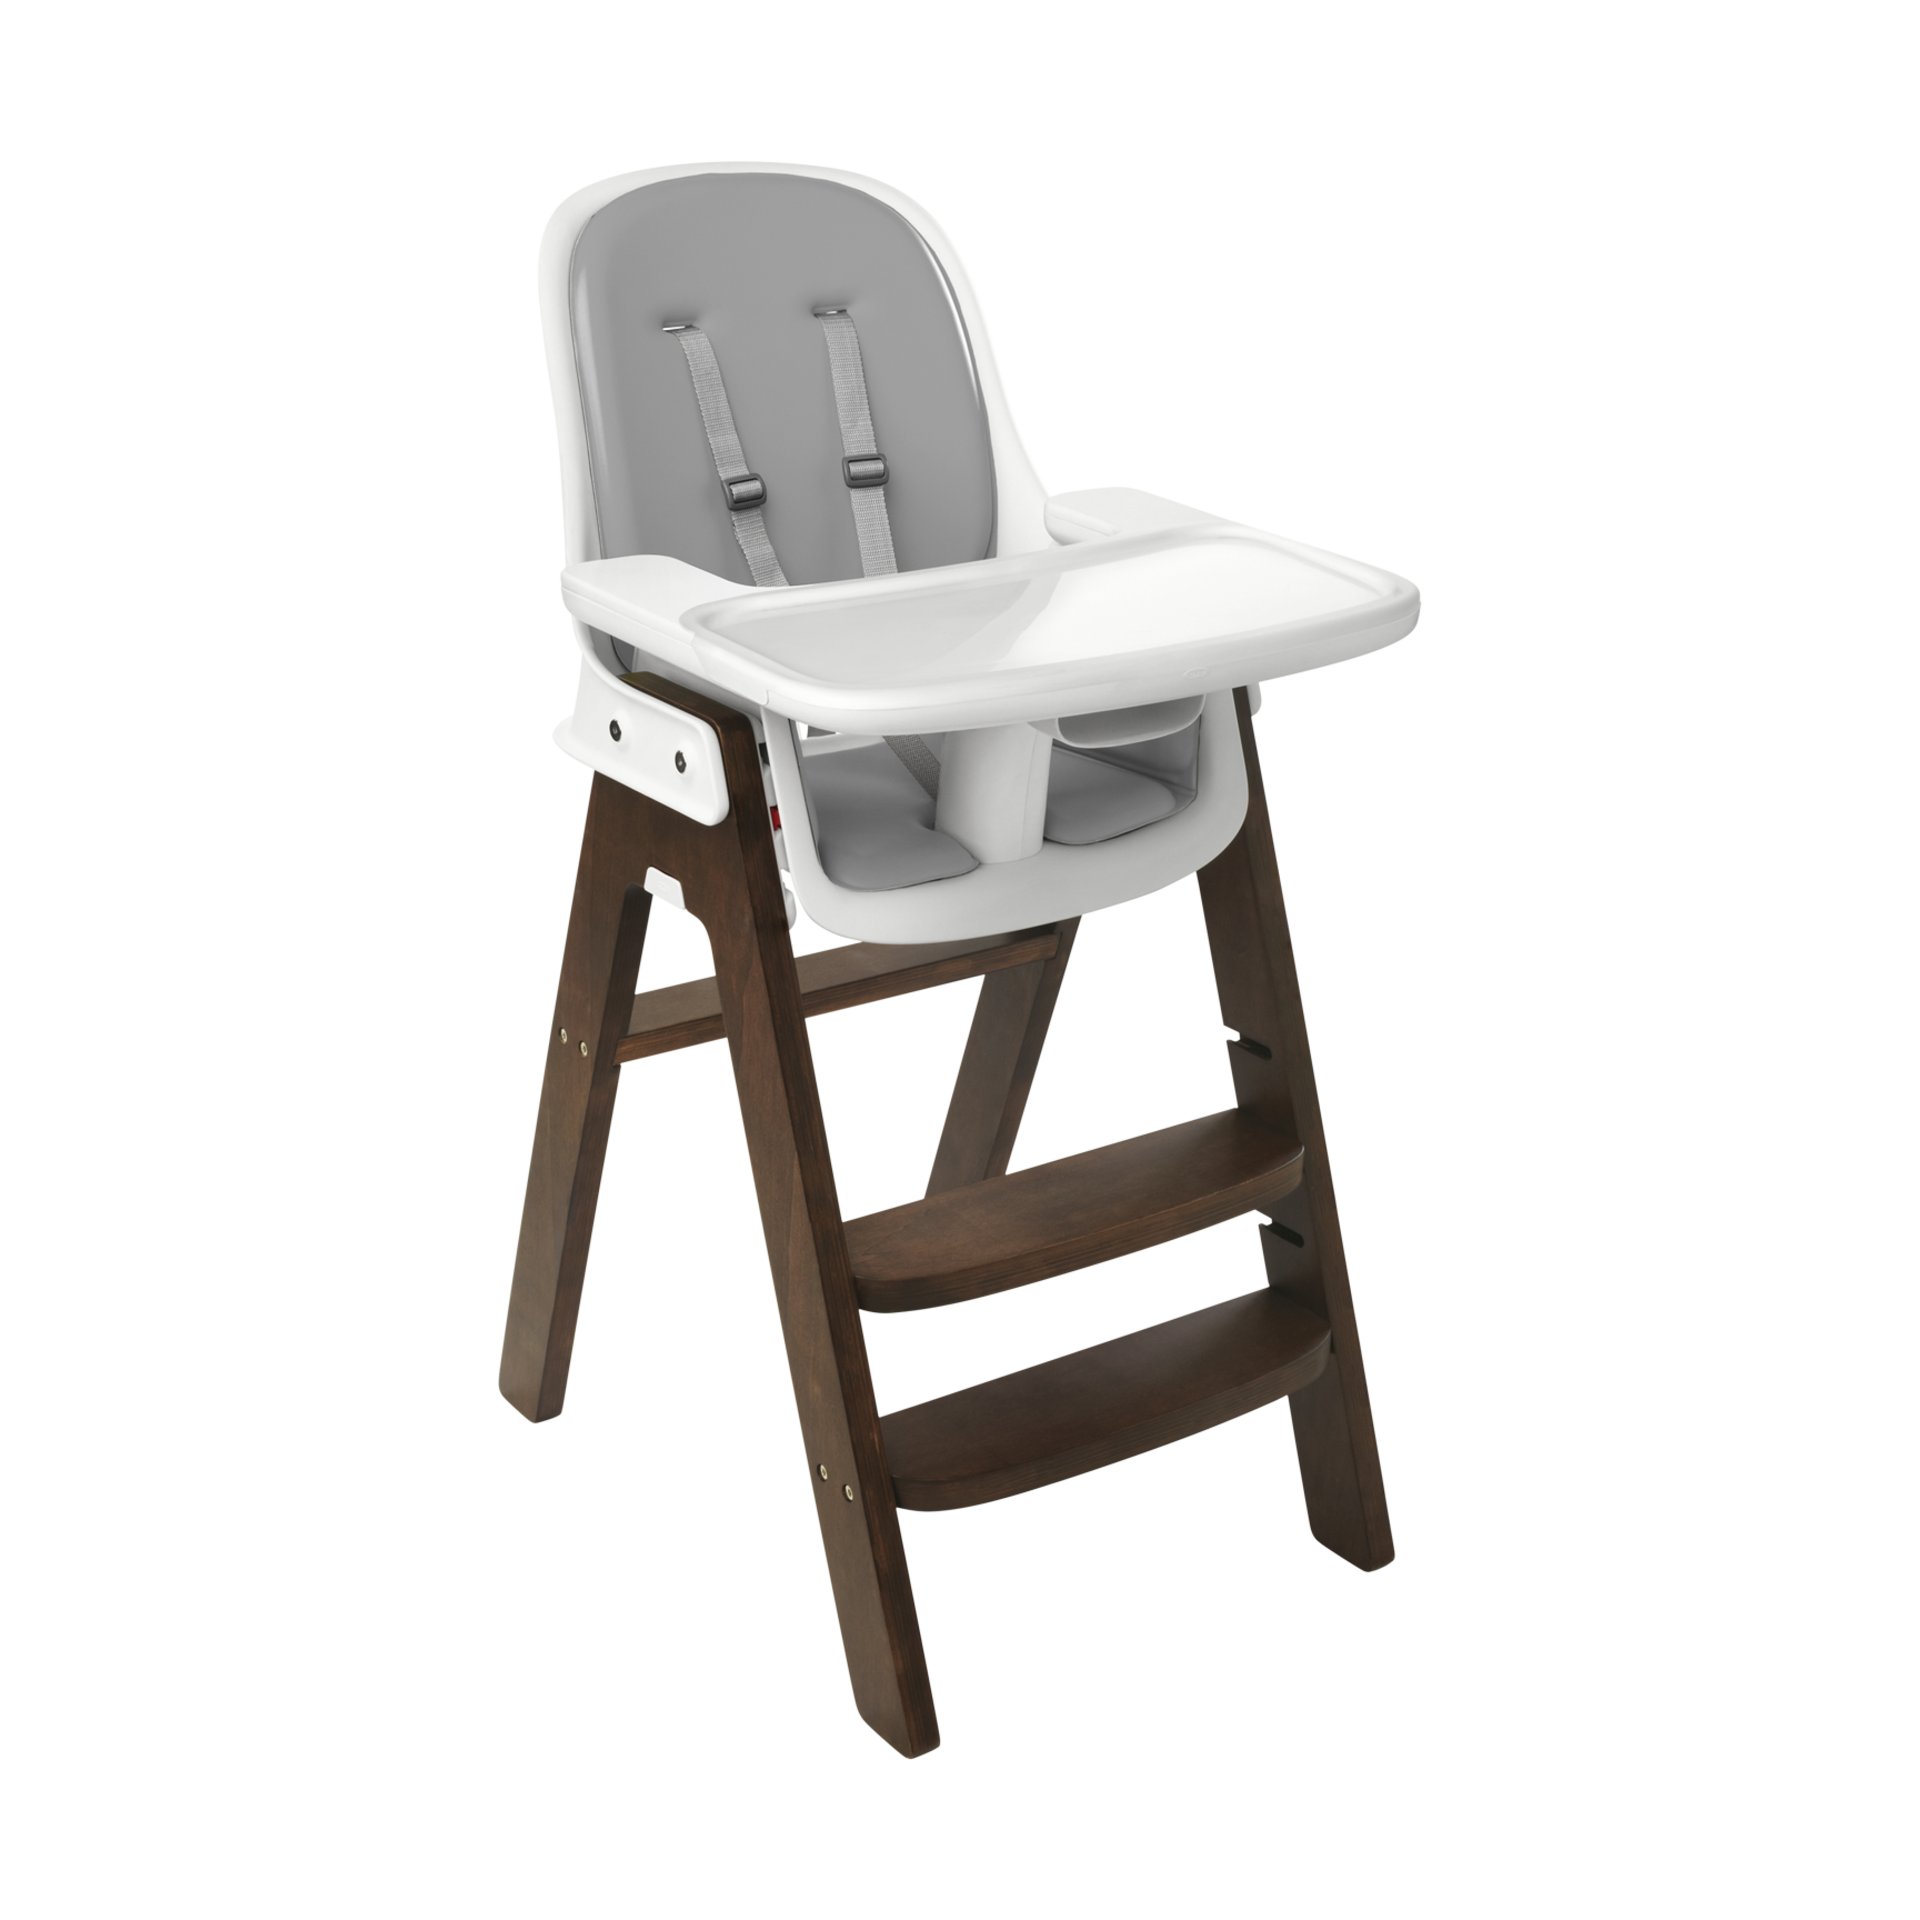 small wooden high chair